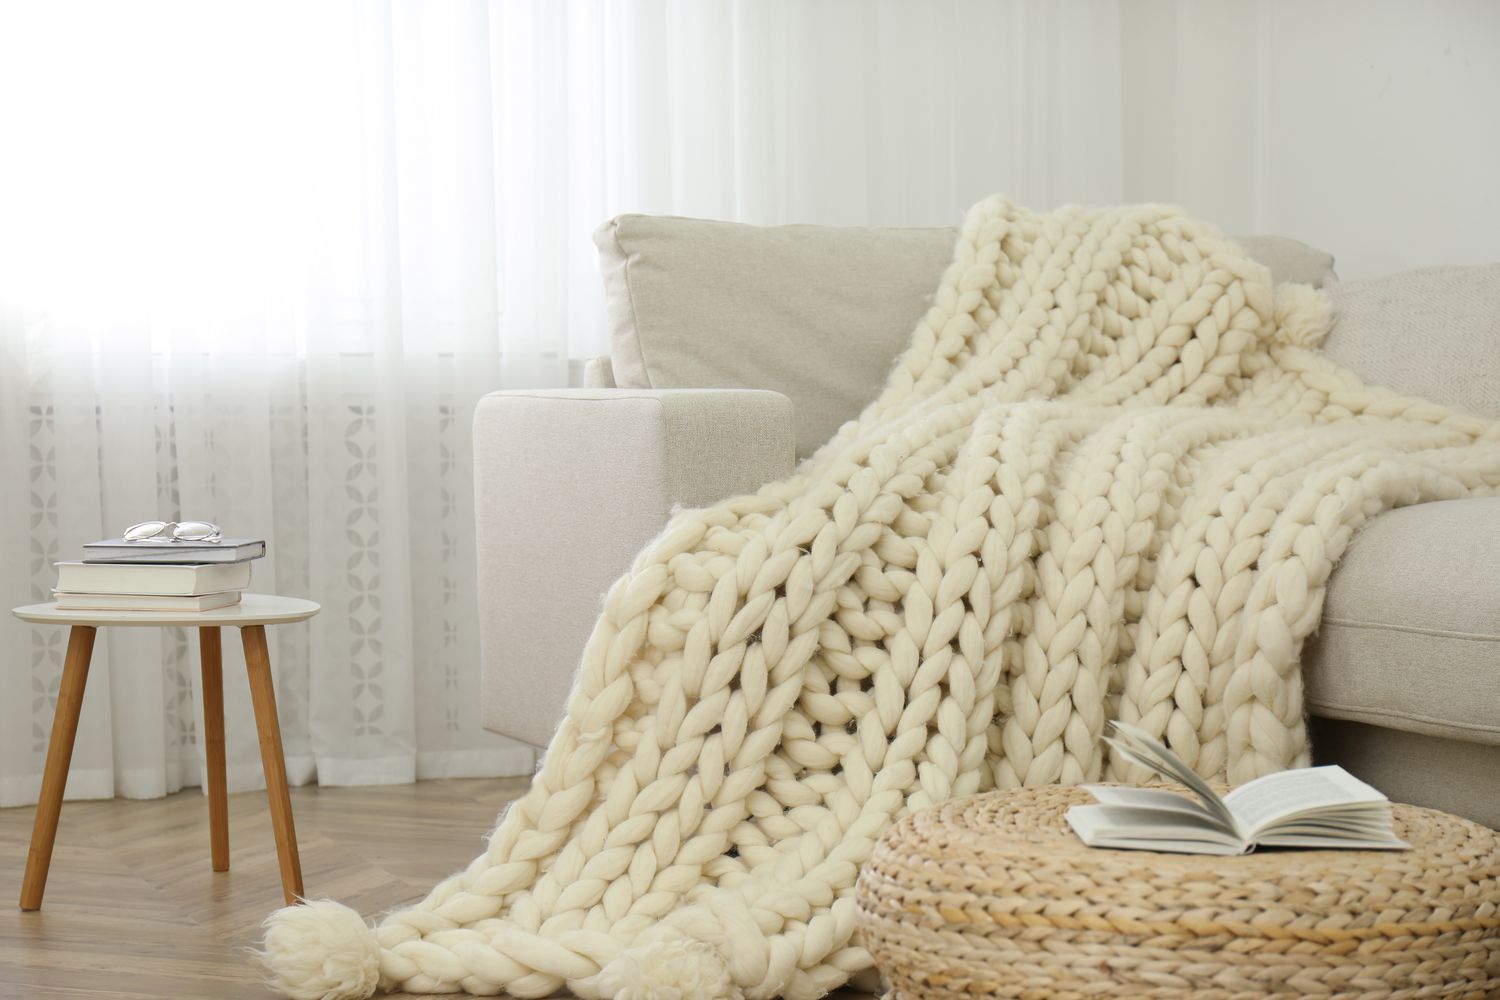 A chunky throw blanket on a couch